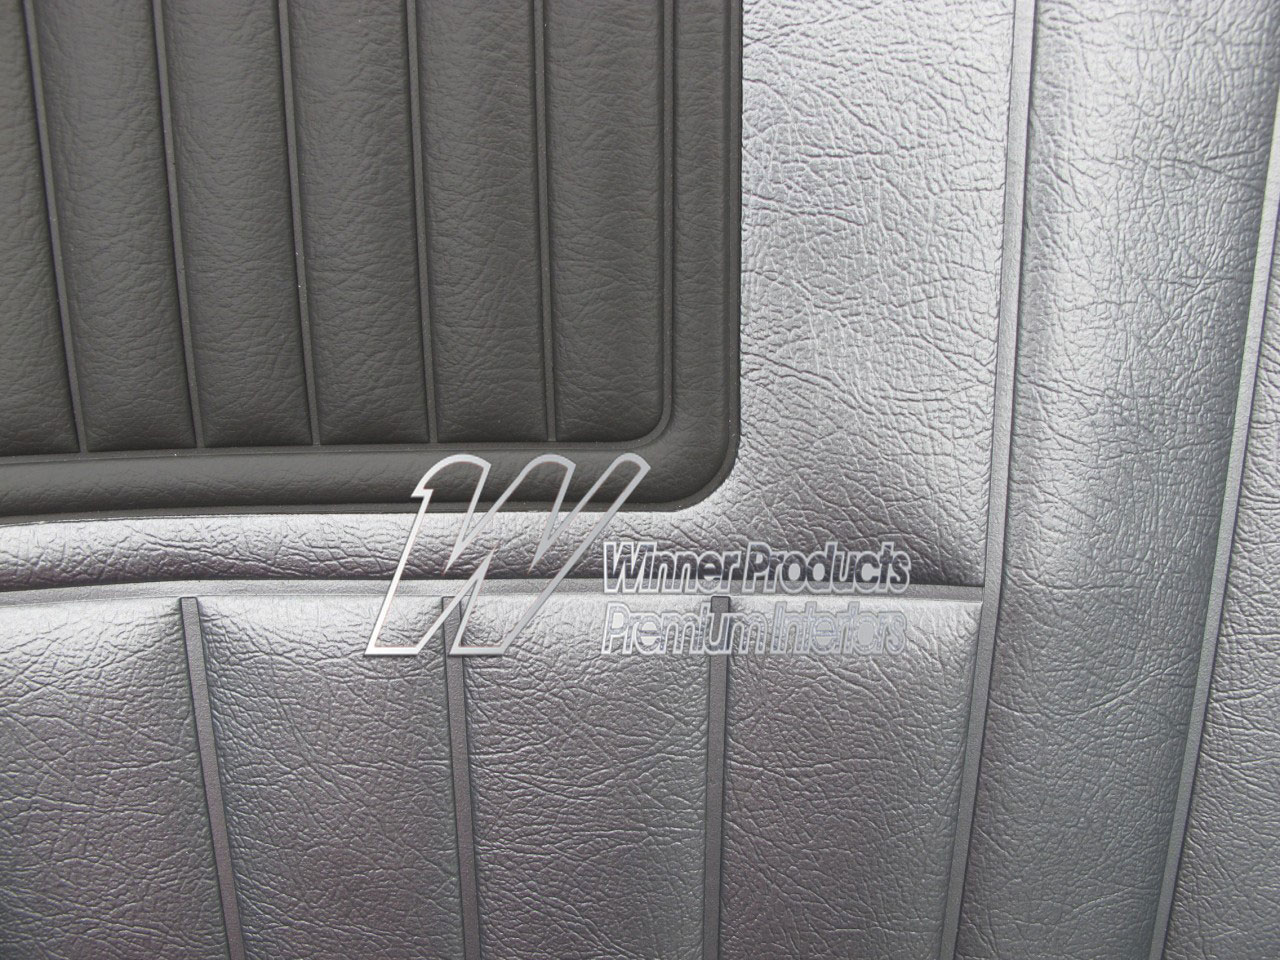 Holden Special EH Special Wagon C43 Alligator & Elephant Grey Seat Covers (Image 2 of 3)